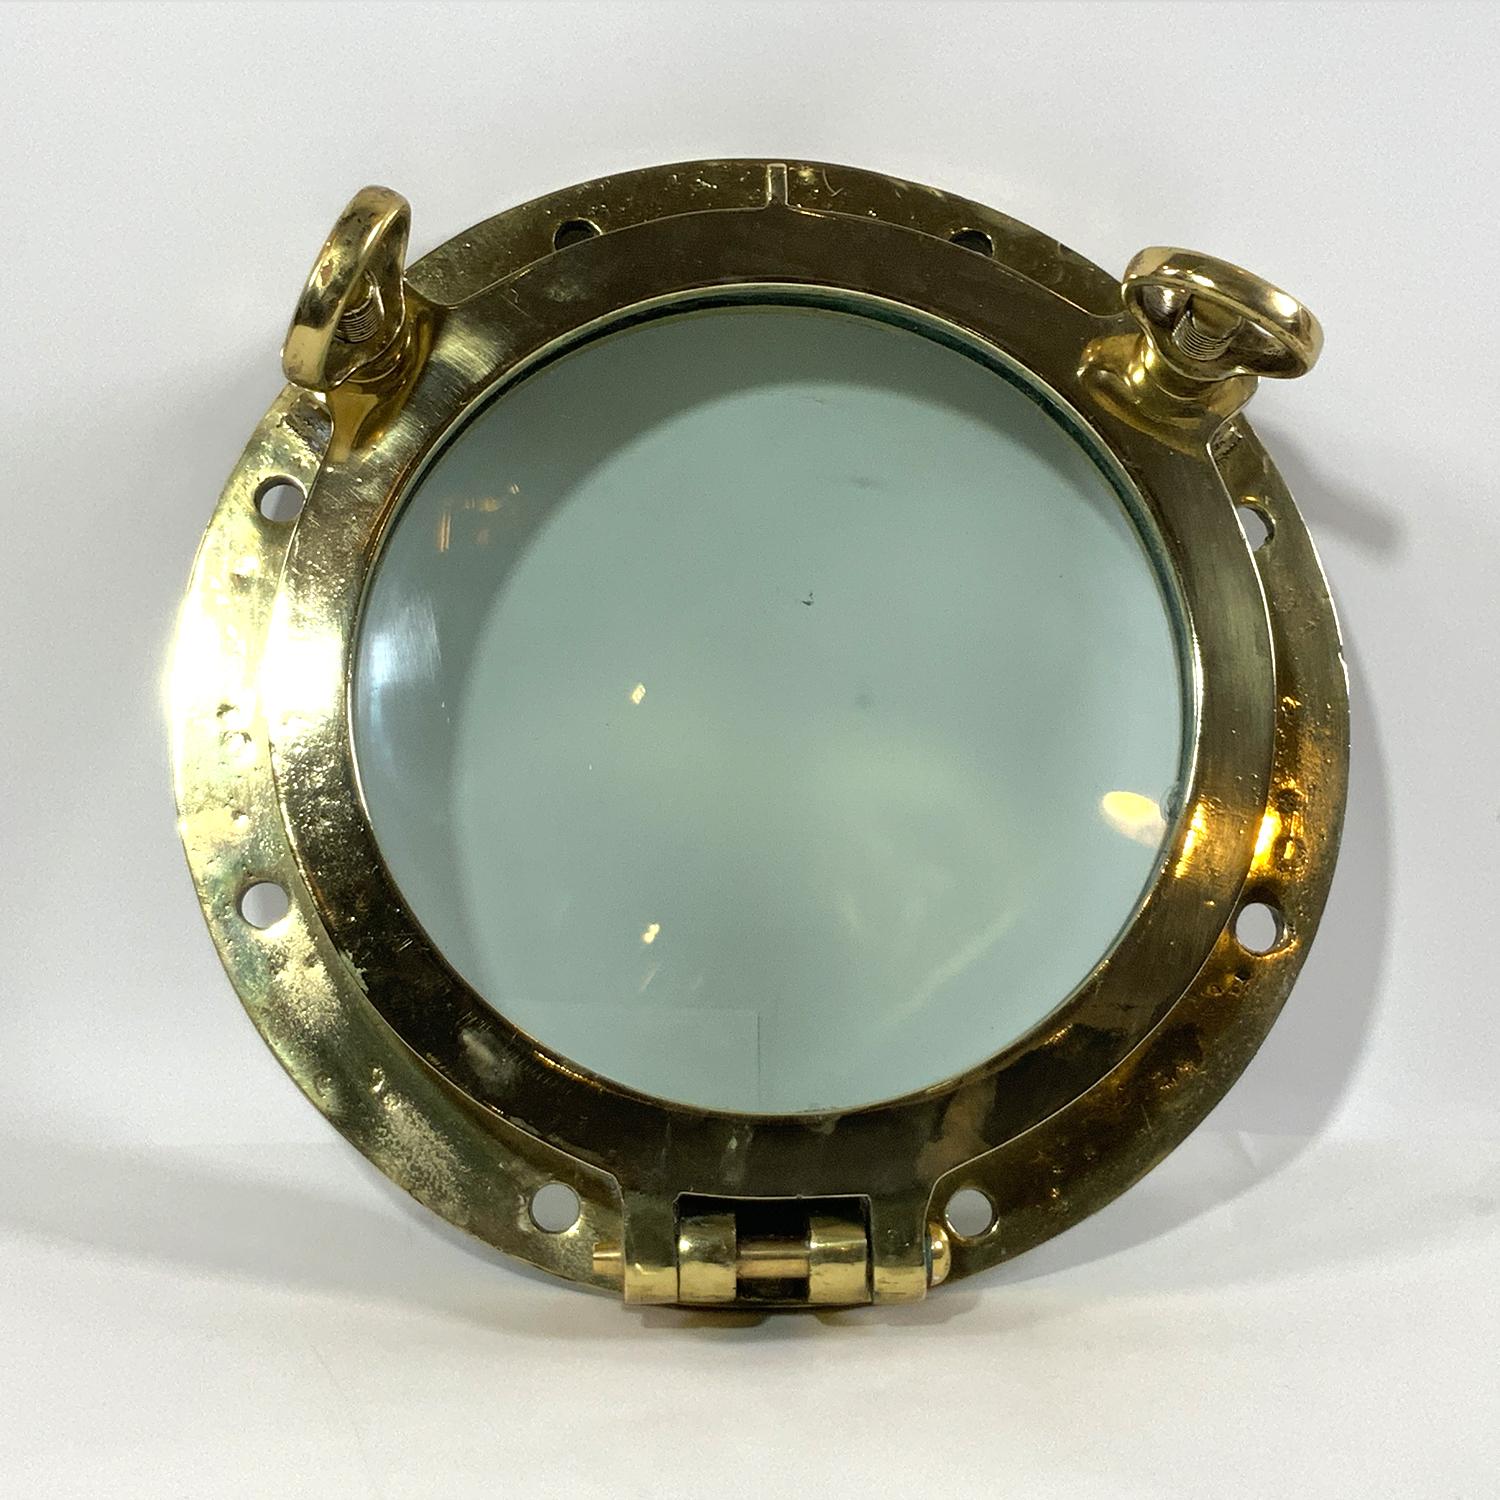 Lacquered Solid Brass Ship or Yacht Porthole